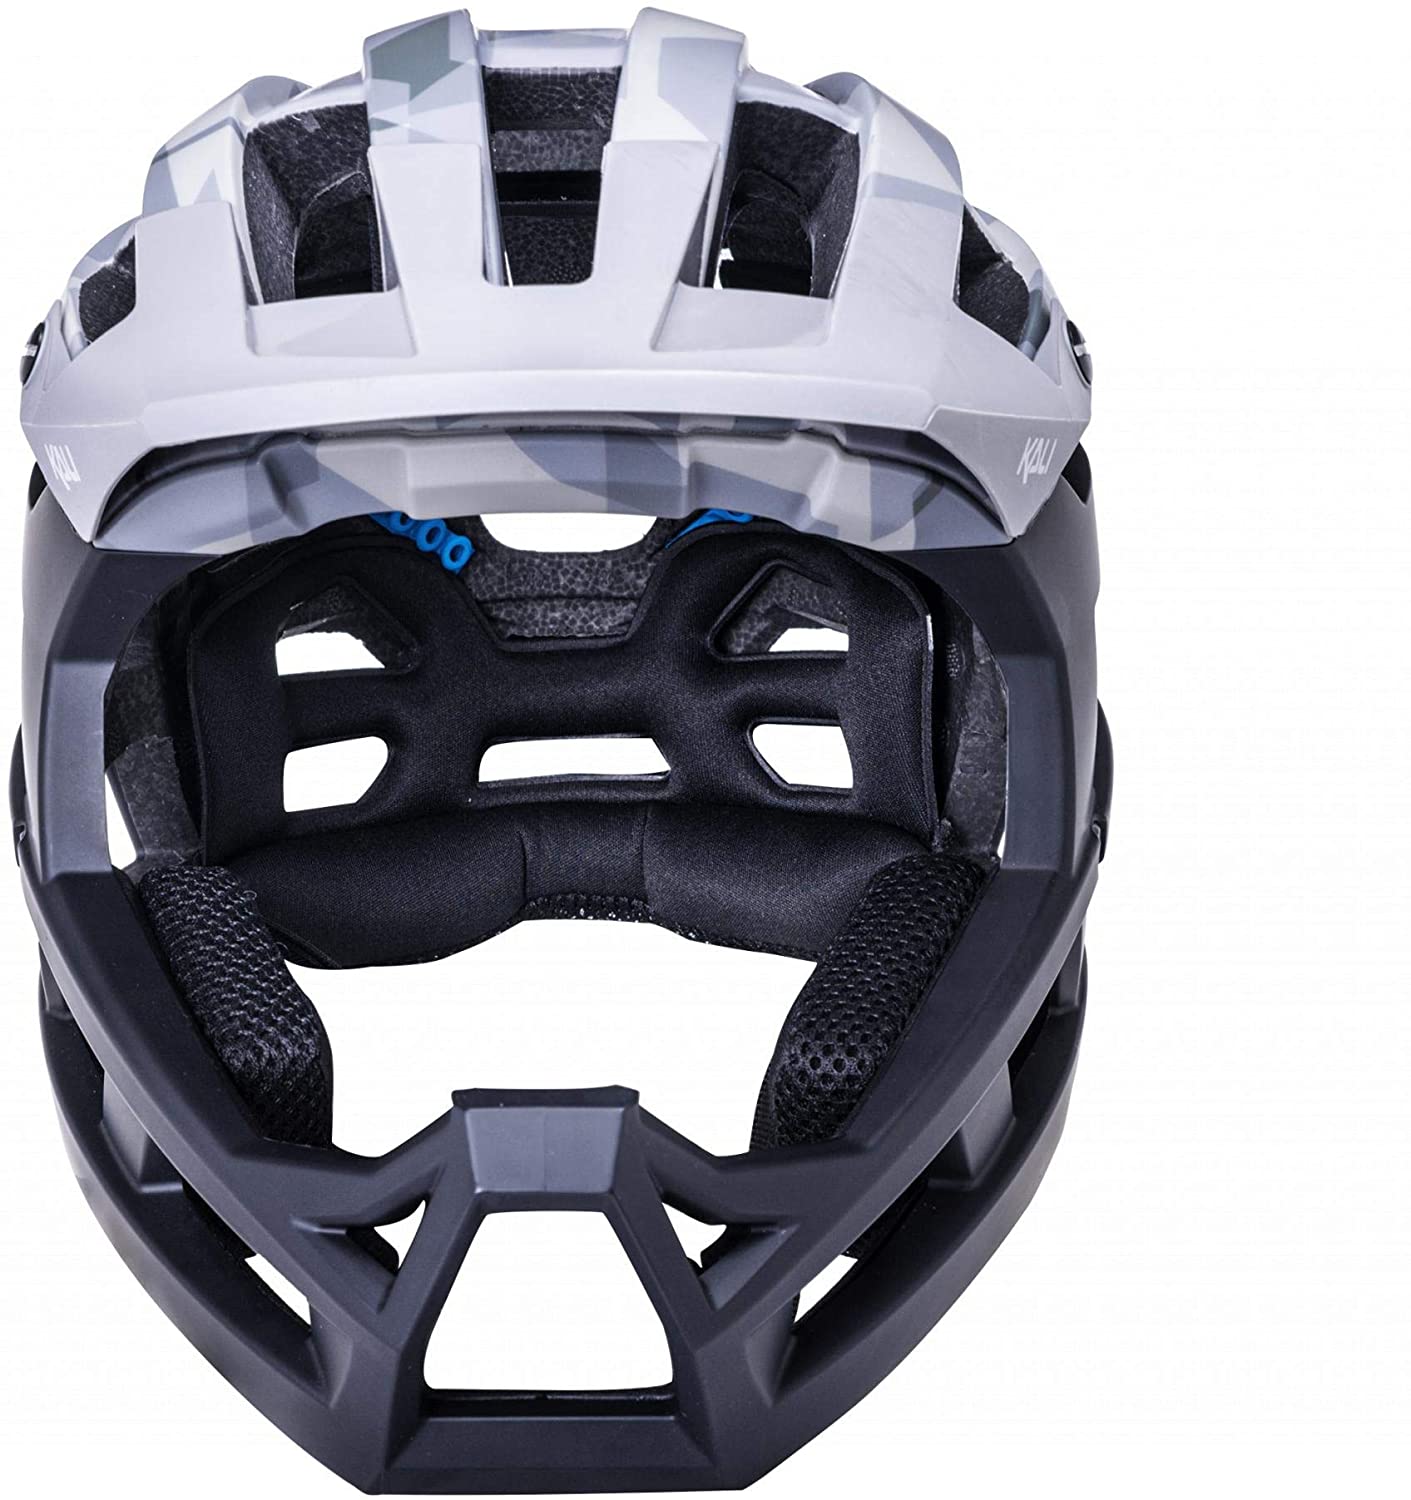 Kali Protectives Invader Full Face Off Road Mountain Bike Helmet (XS – 2XL)